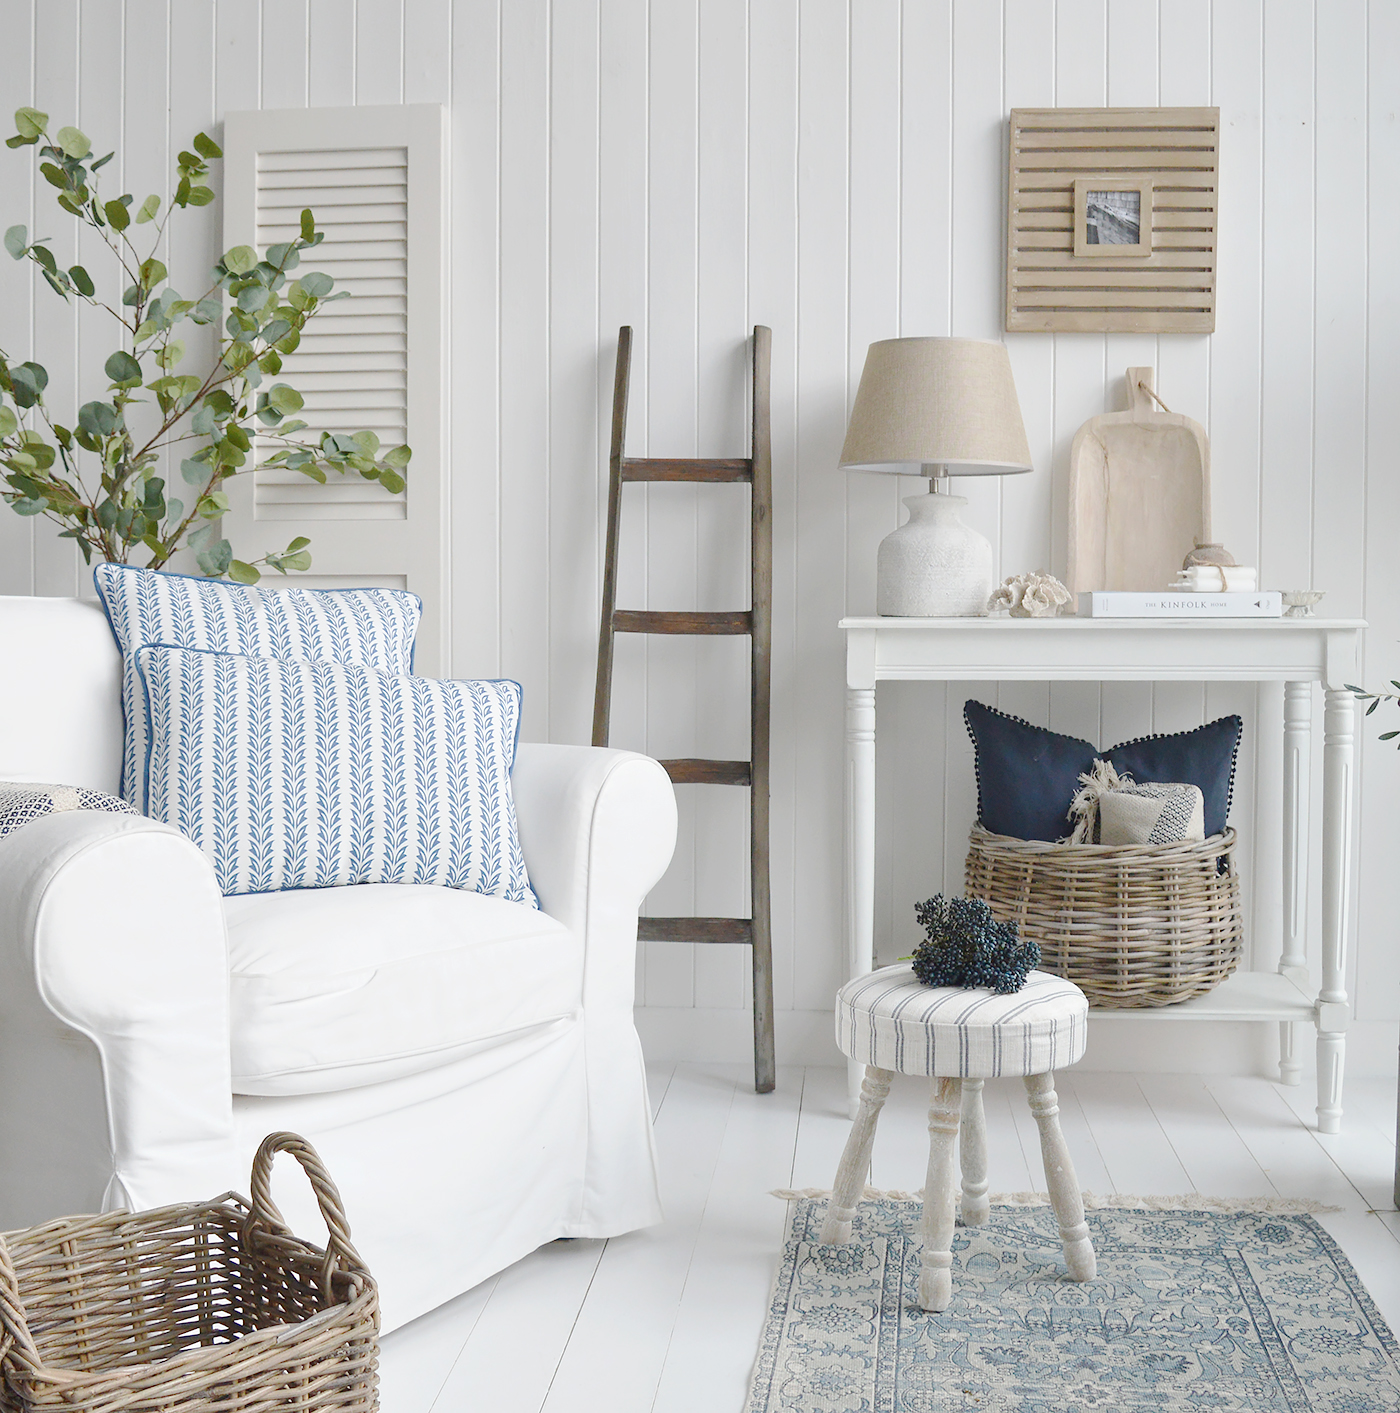 New England countyr, farmhouse and coastal furniture and interiors. Showing driftwood blanket ladder, Long Island footstool, Falmouth cushions, artificial Eucalyptus tree Barnstead lamd and home decor accessories.